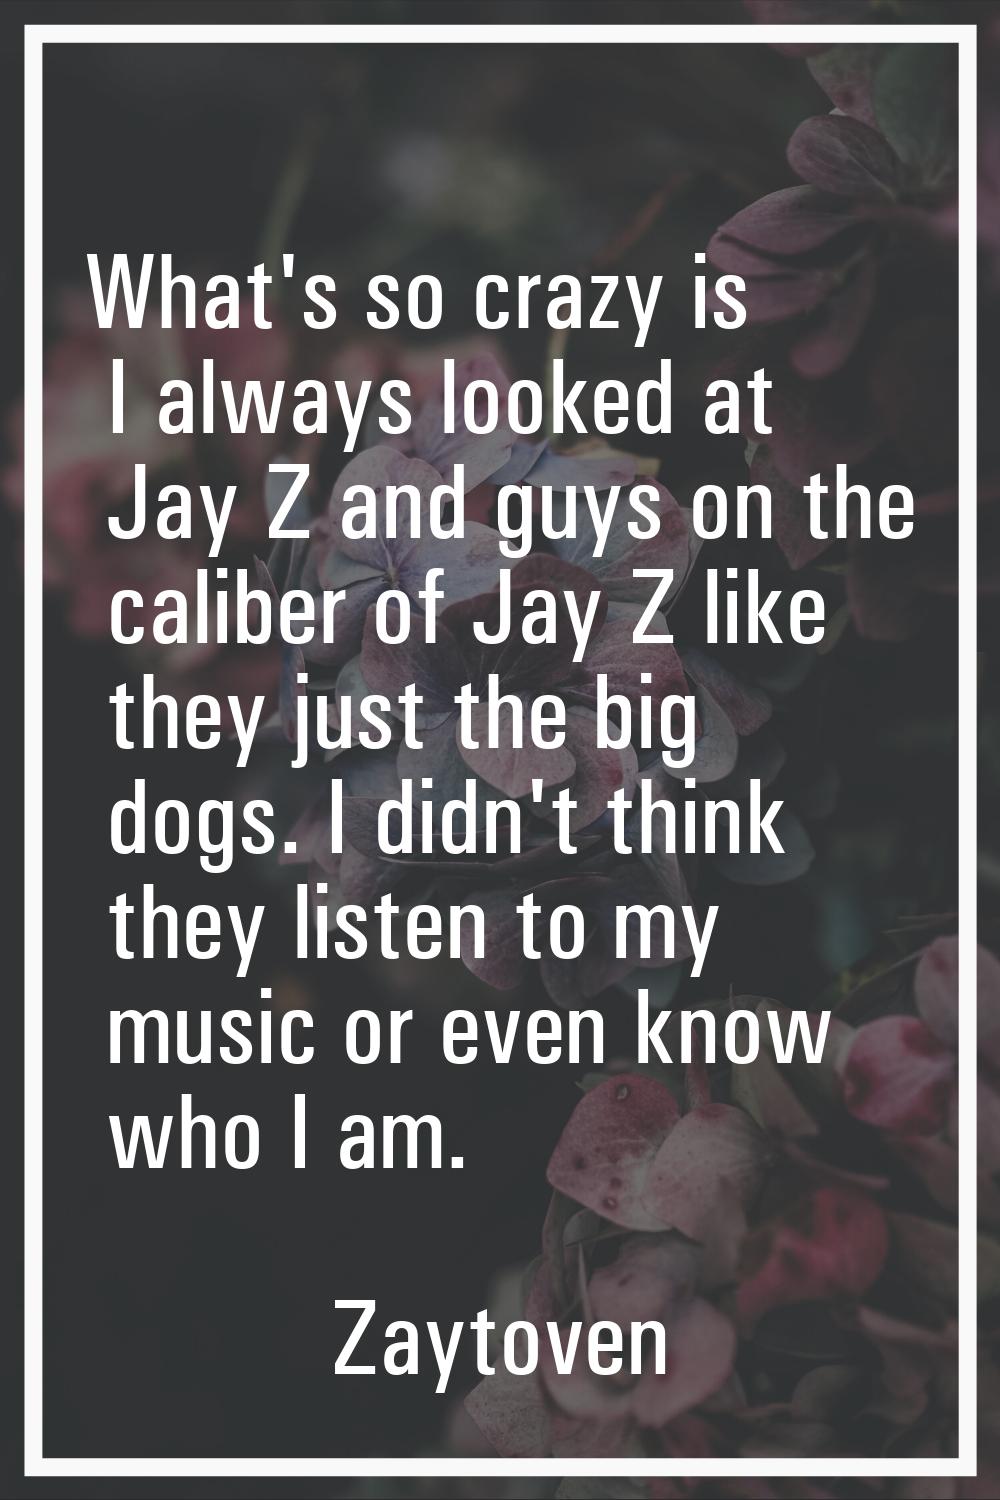 What's so crazy is I always looked at Jay Z and guys on the caliber of Jay Z like they just the big